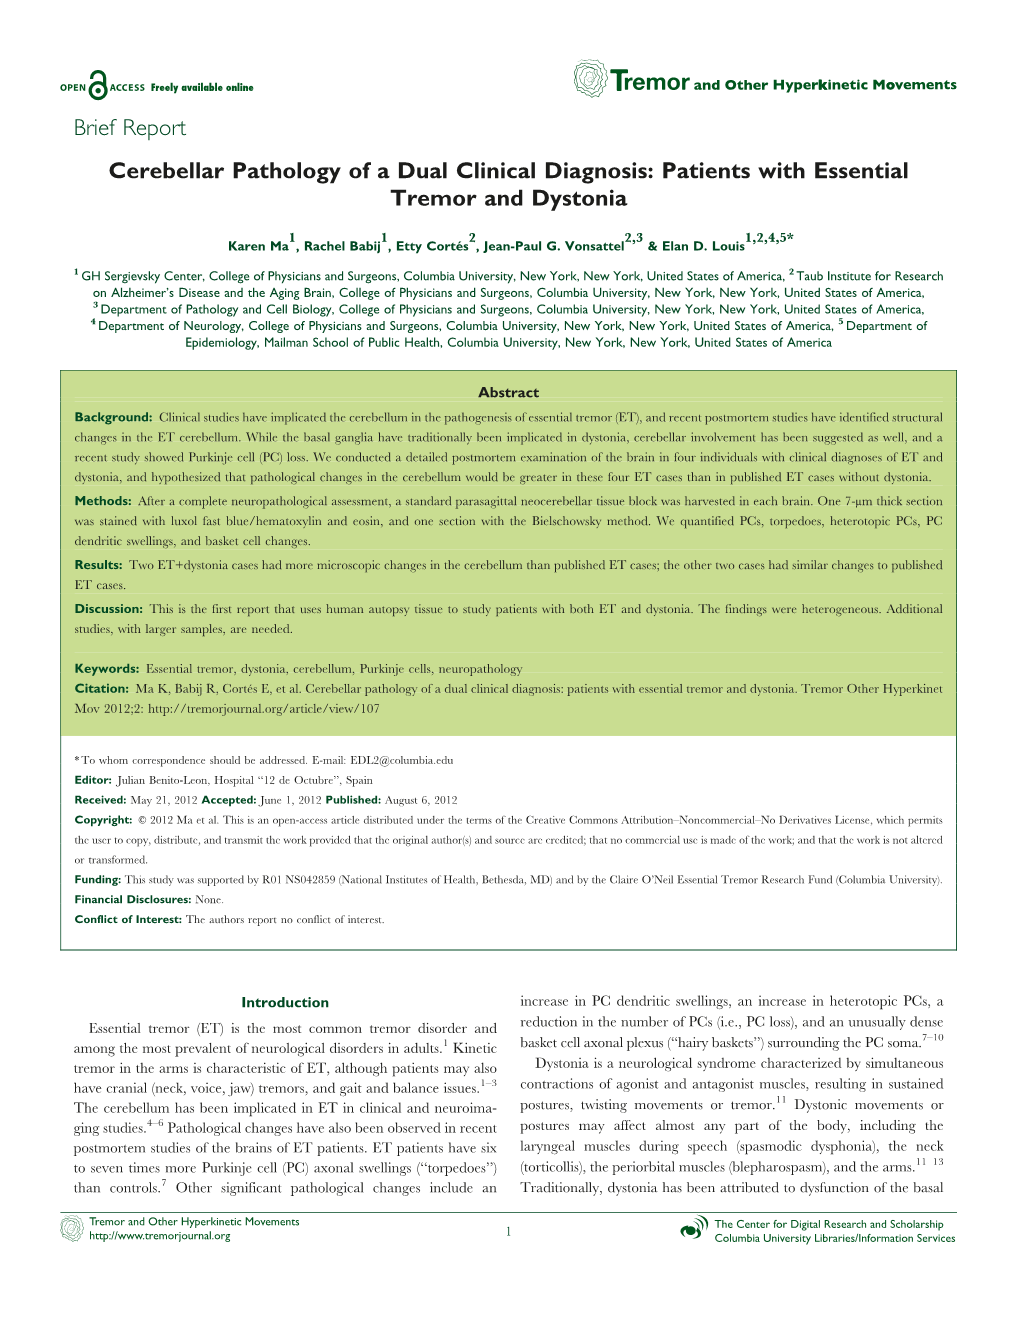 Patients with Essential Tremor and Dystonia